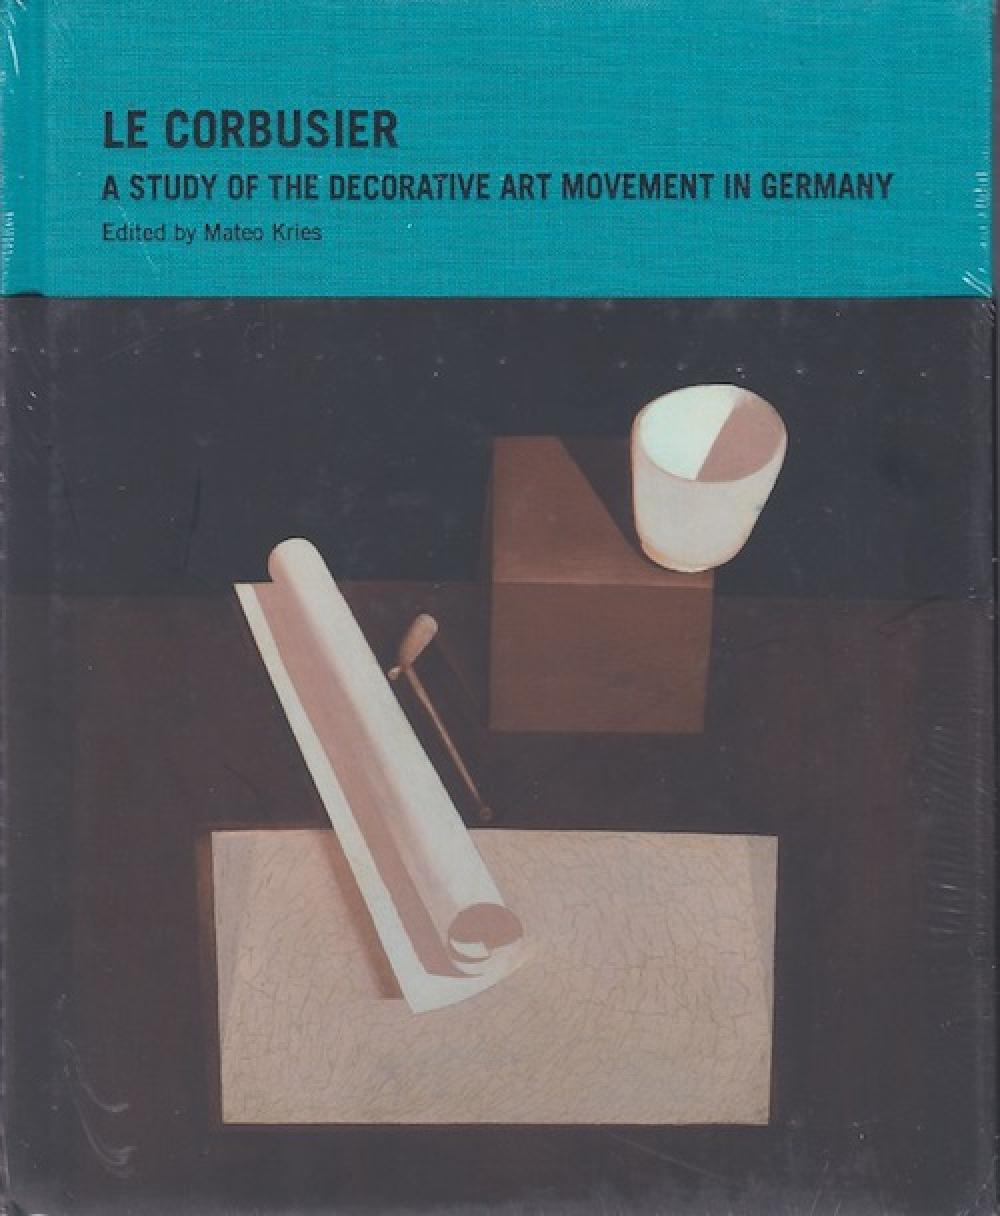 Le Corbusier: A Study of the Decorative Art Movement in Germany